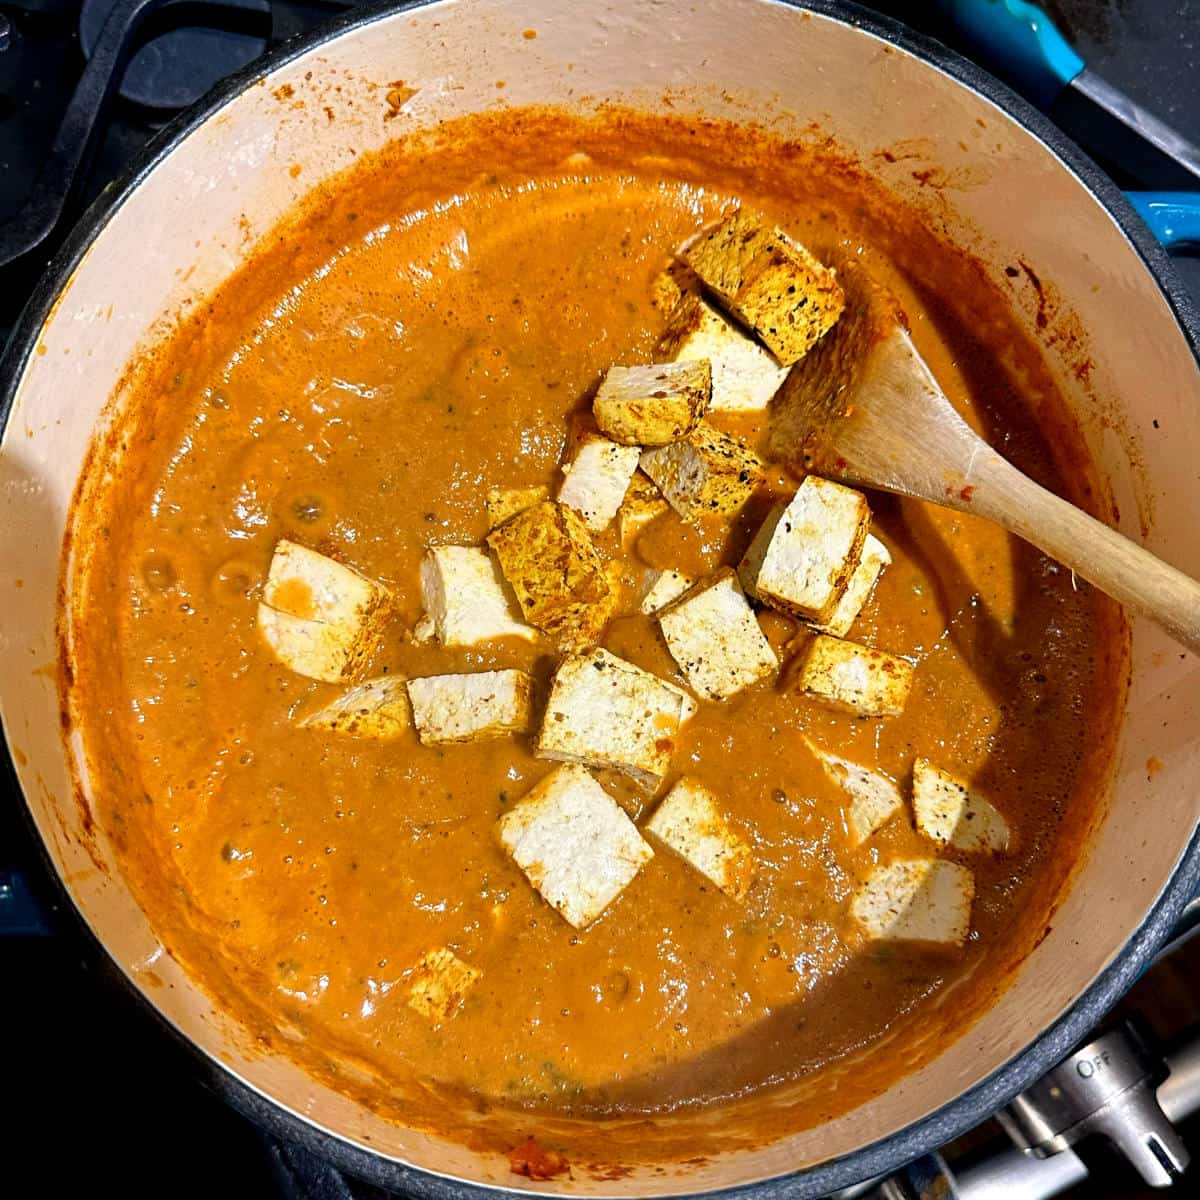 Tofu cubes added to the makhani sauce in pot.